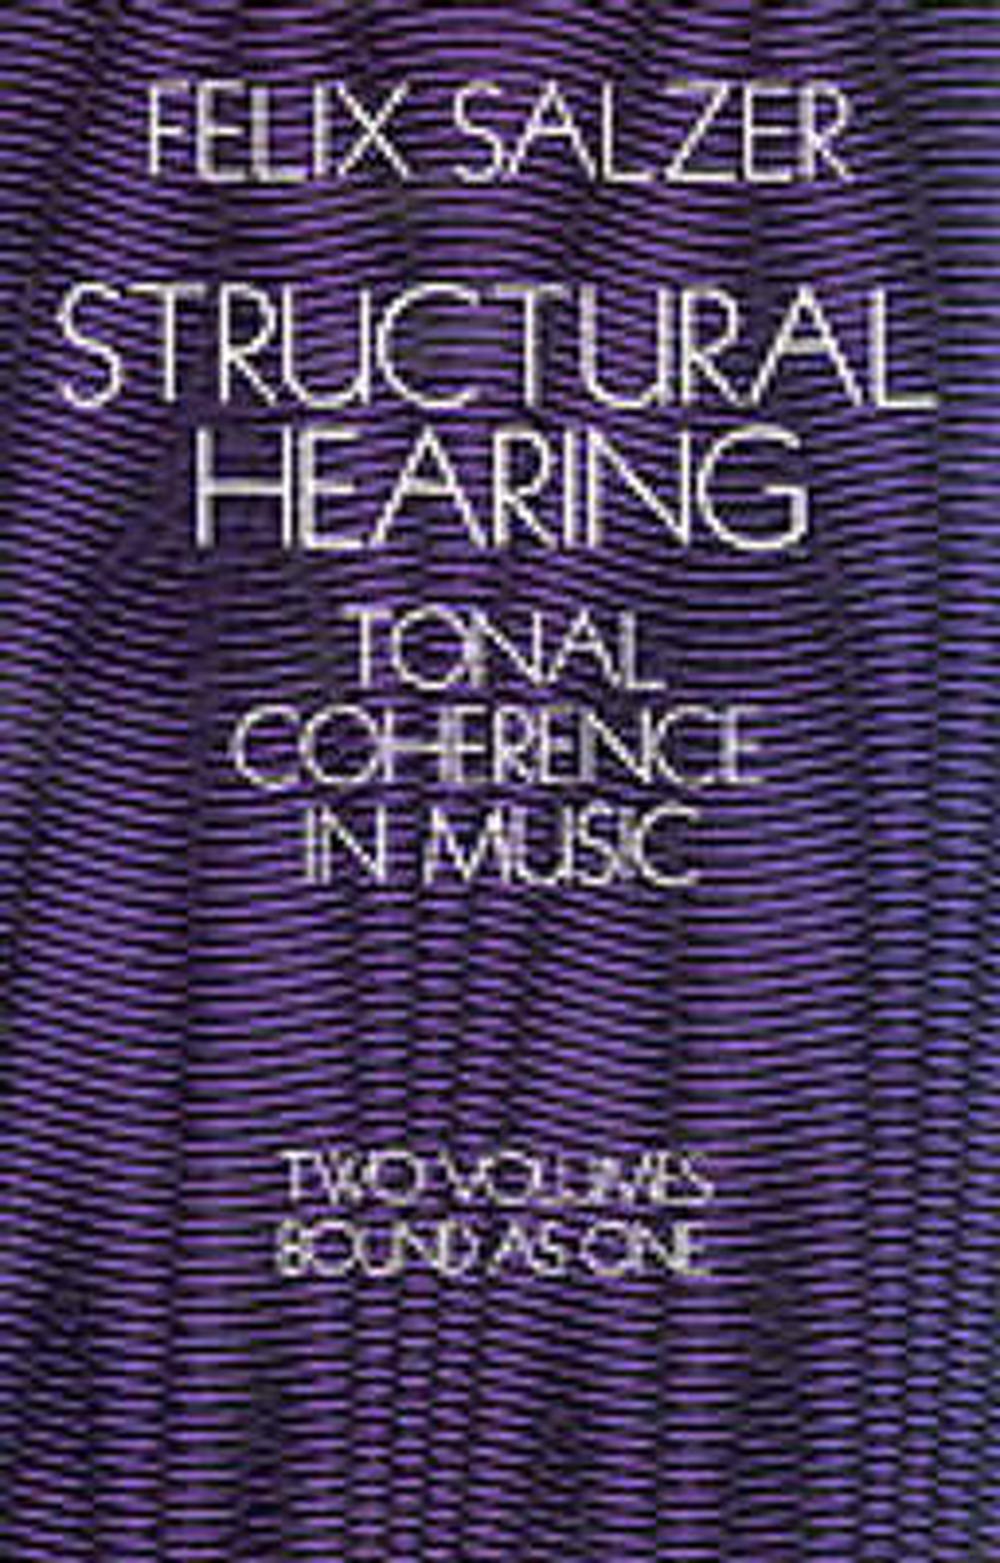 Structural Hearing Tonal Coherence in Music by Felix Salzer (English